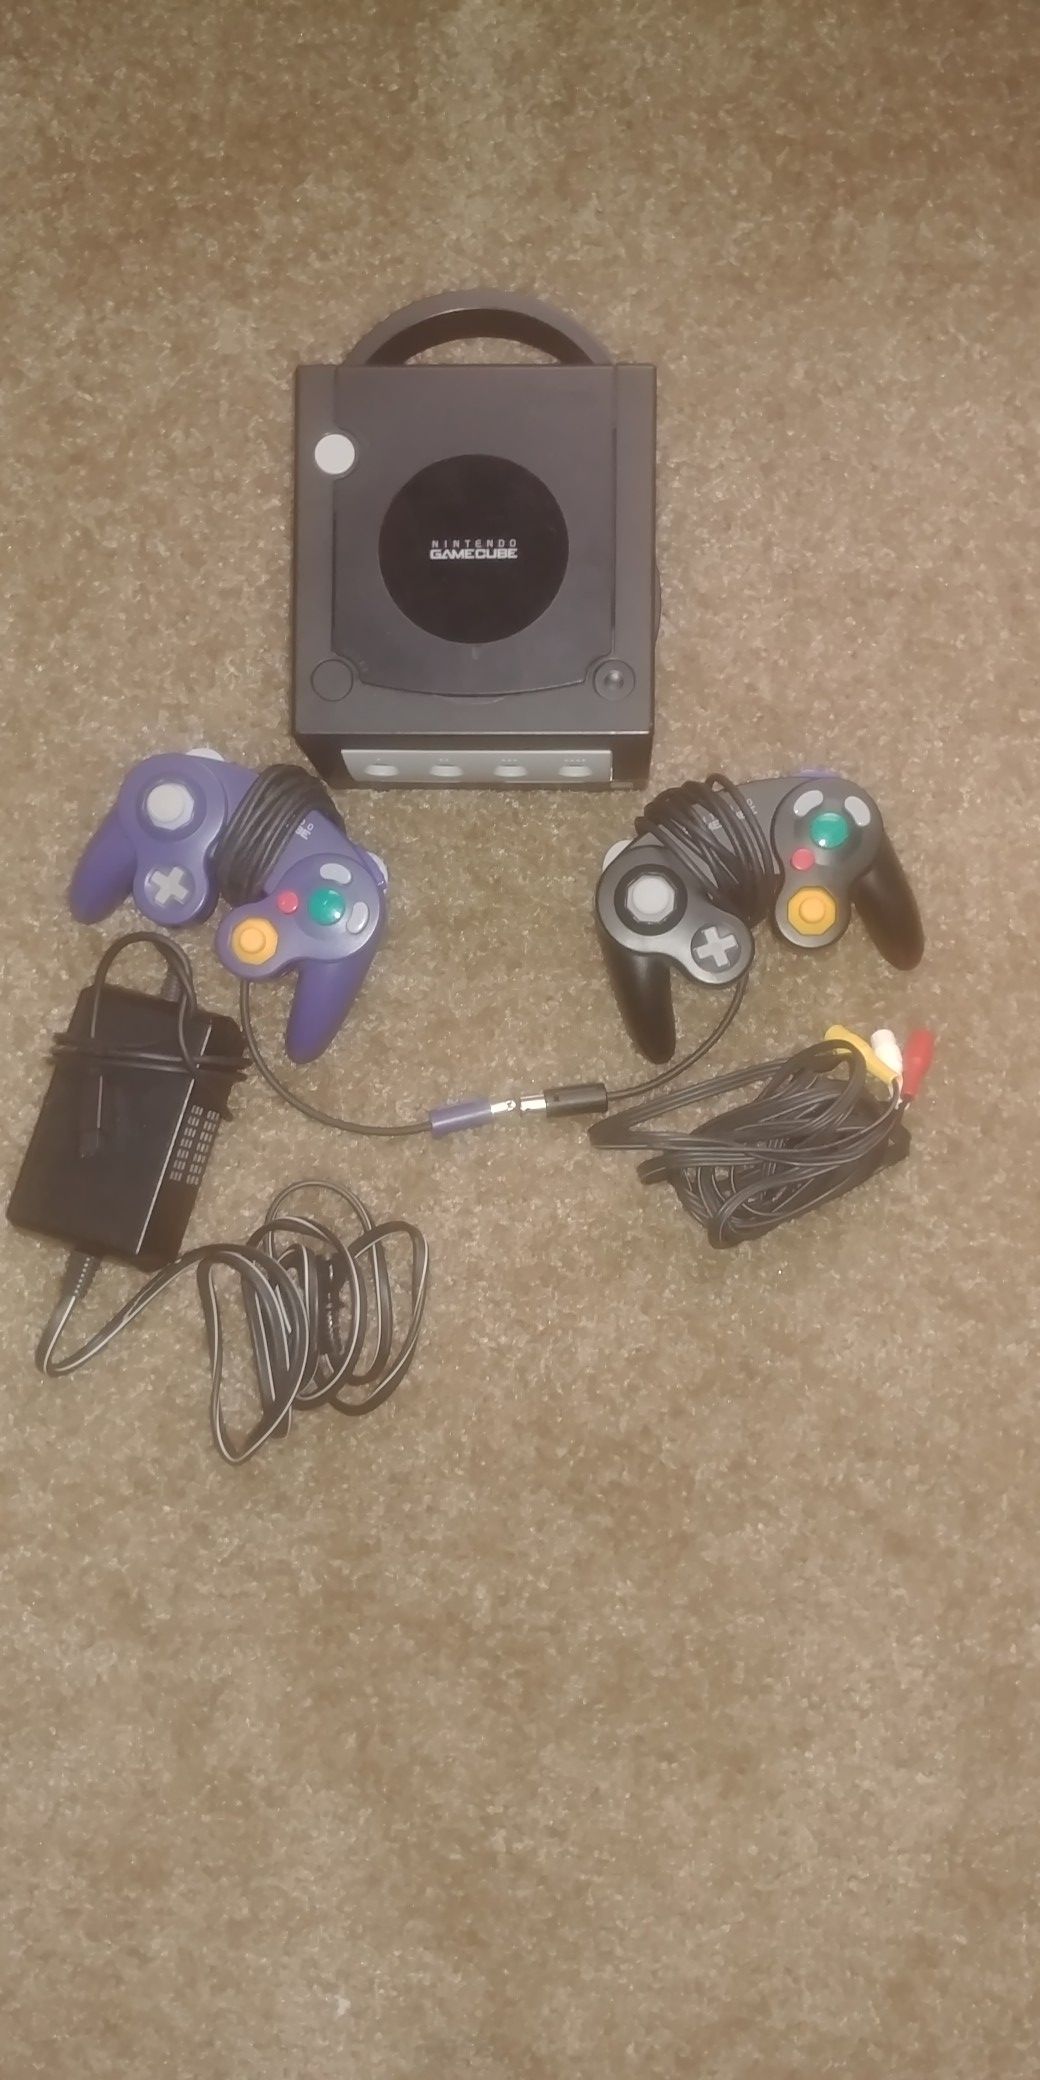 Nintendo GameCube with 2 controllers, Cables, Super Smash Bros., and Madden 06.